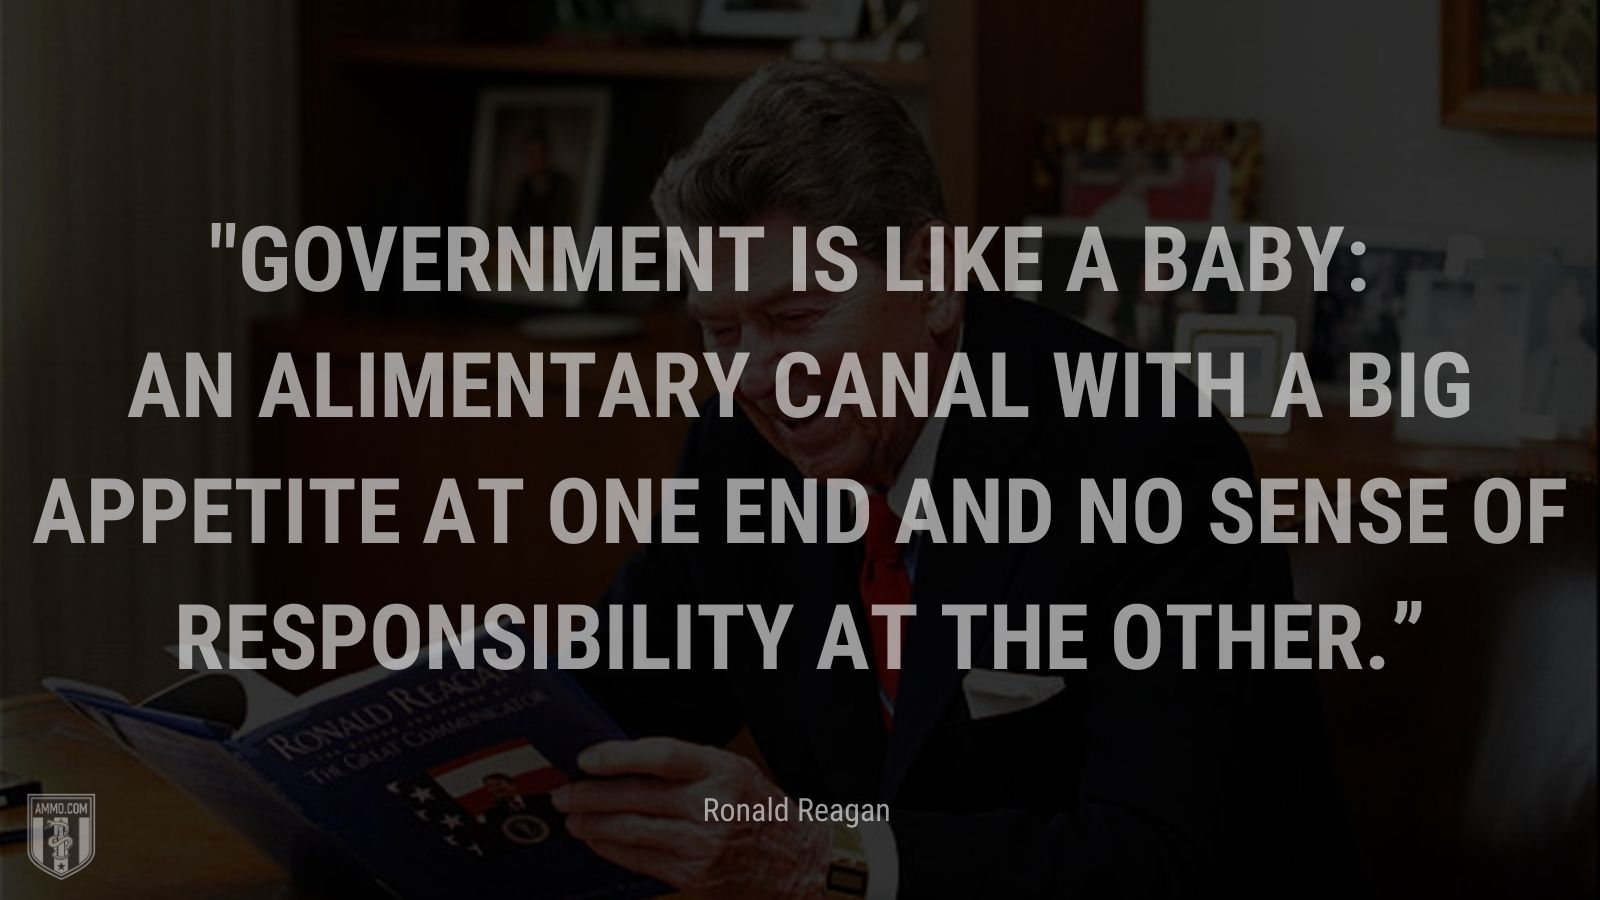 “Government is like a baby: An alimentary canal with a big appetite at one end and no sense of responsibility at the other.” - Ronald Reagan